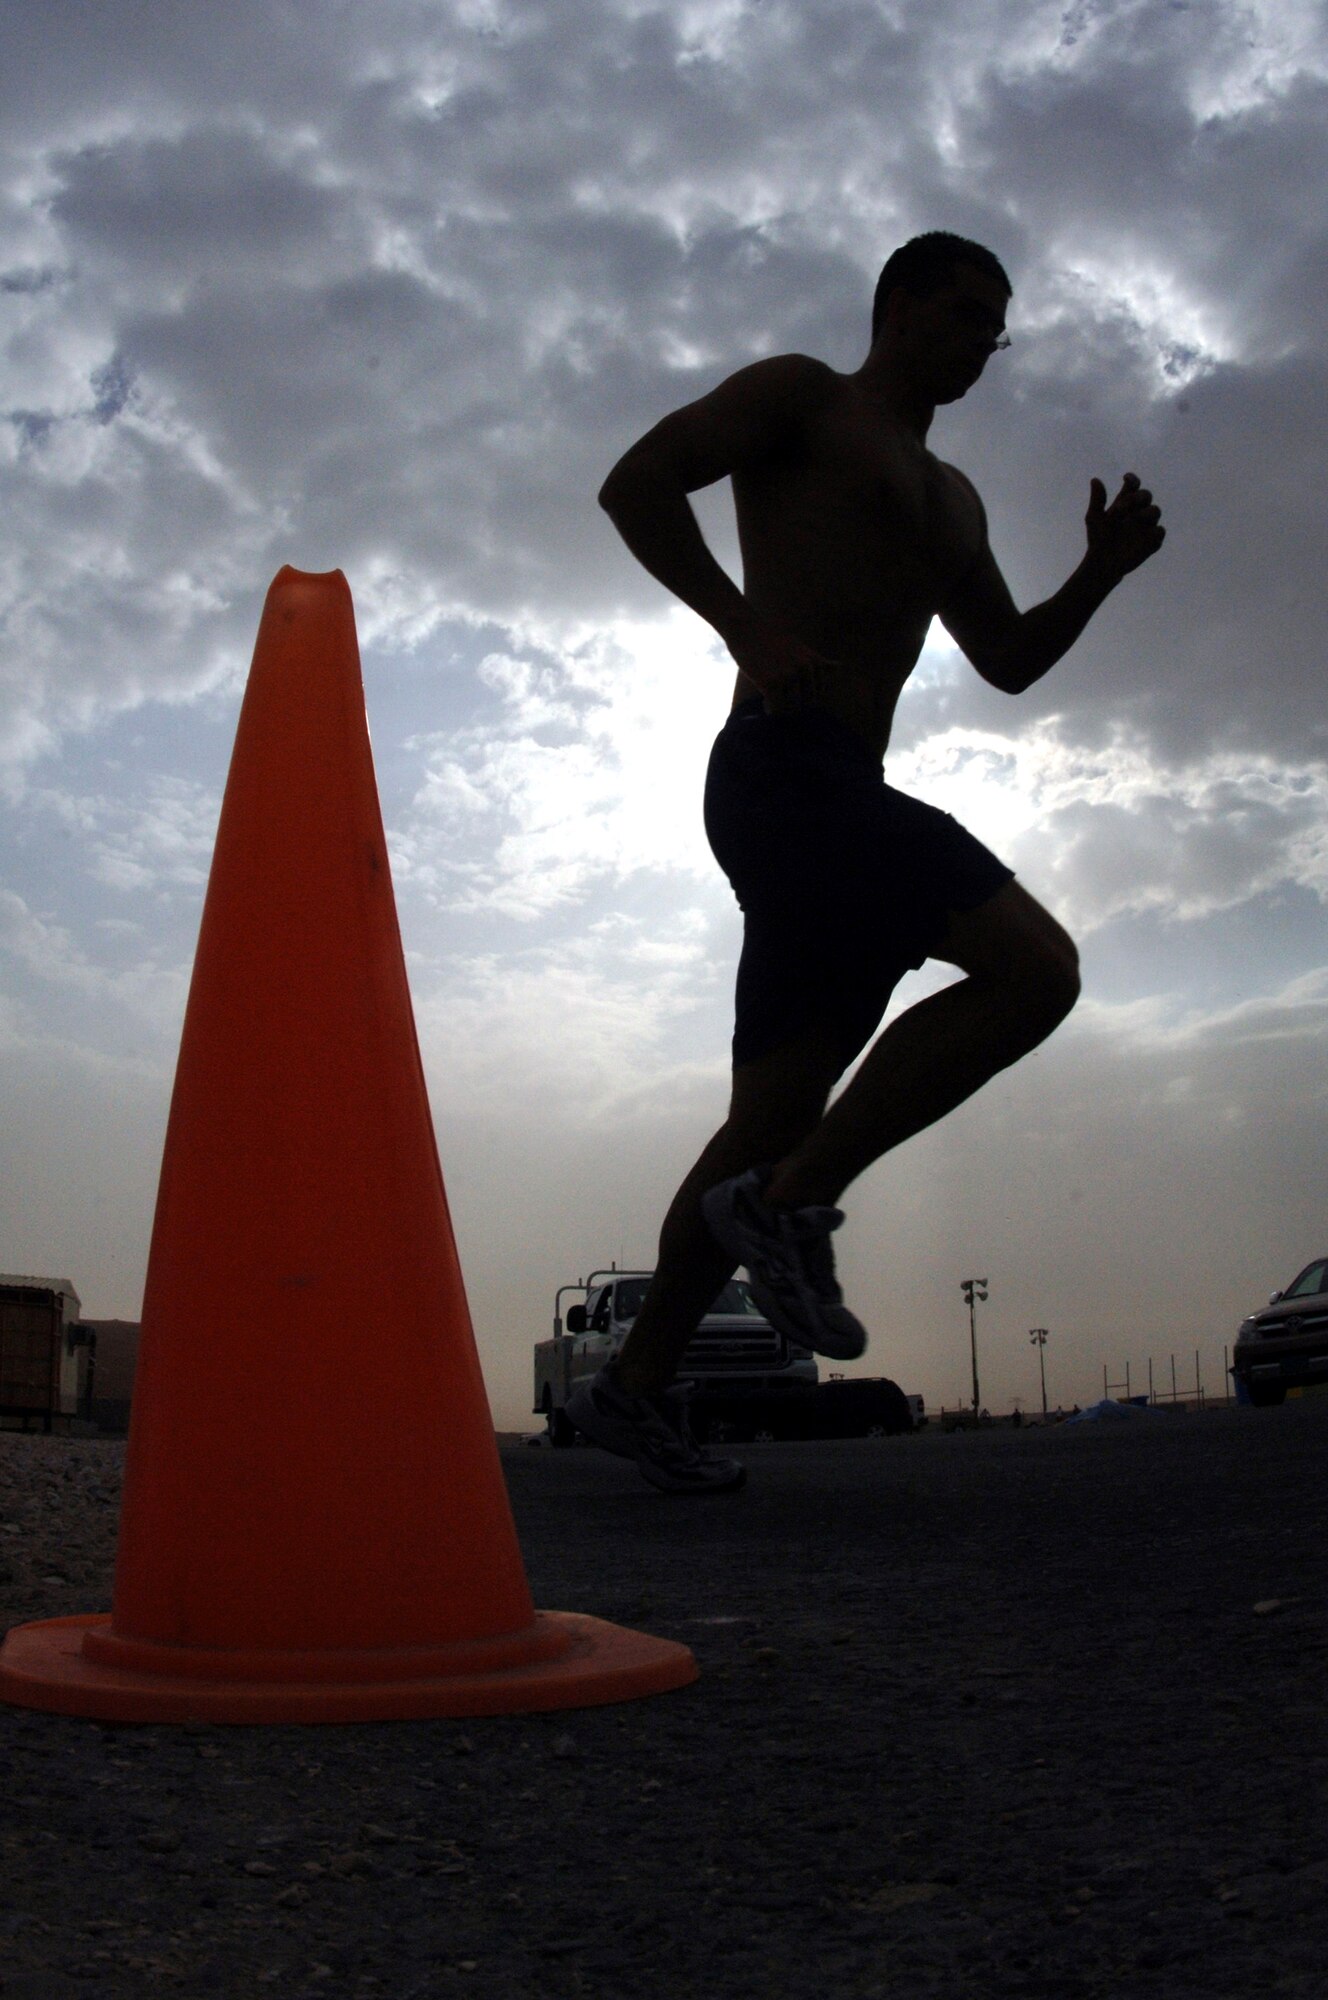 An Airman is silhouetted as he runs in the biathlon portion of the 379th Air Expeditionary Wing Sports Day on Sunday, April 23, 2006. The biathlon consisted of a 1,600-meter swim and 5-kilometer run. Other events at the deployed location in Southwest Asia included volleyball, a home run derby, basketball, dodgeball and a "strongman and woman" contest. (U.S. Air Force photo/Staff Sgt. Joshua Strang)